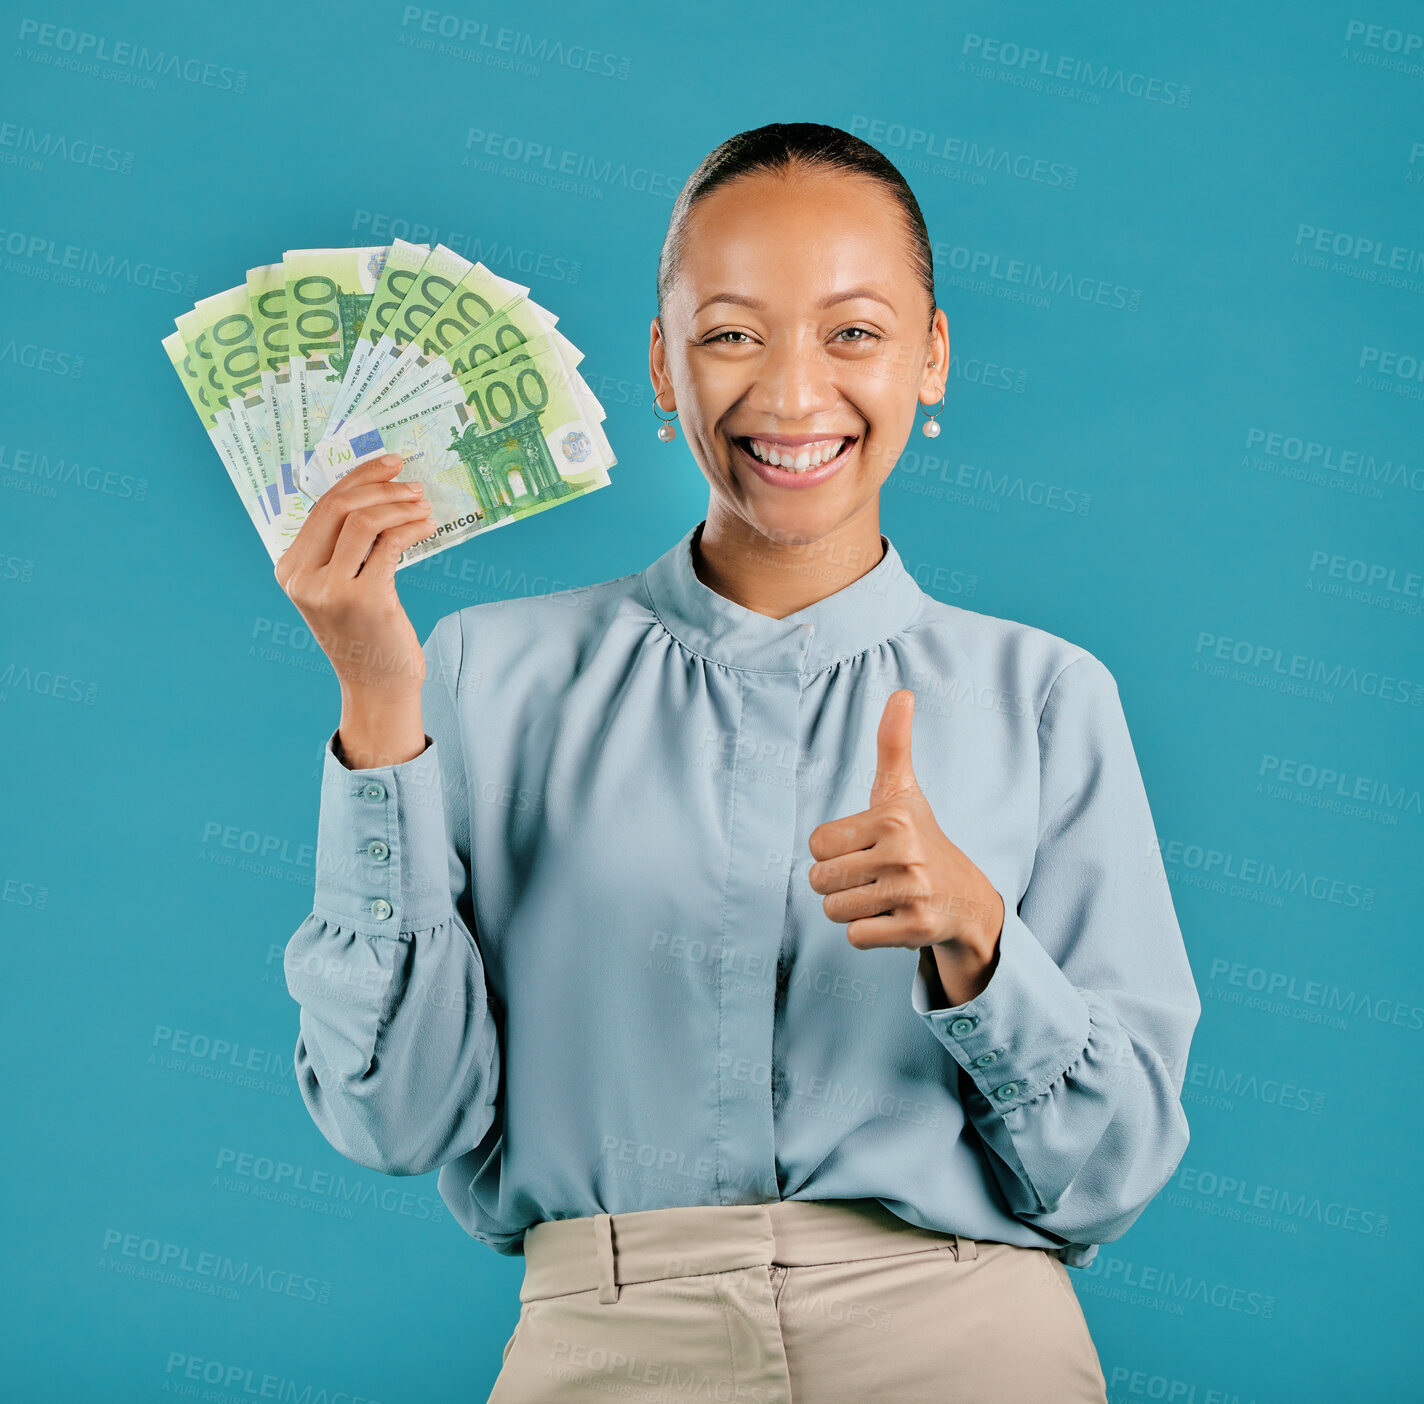 Buy stock photo Thumbs up of a woman happy with financial success holding money and cash to budget. Portrait of a young female proud about successful banking finance, investment profit and salary savings growth